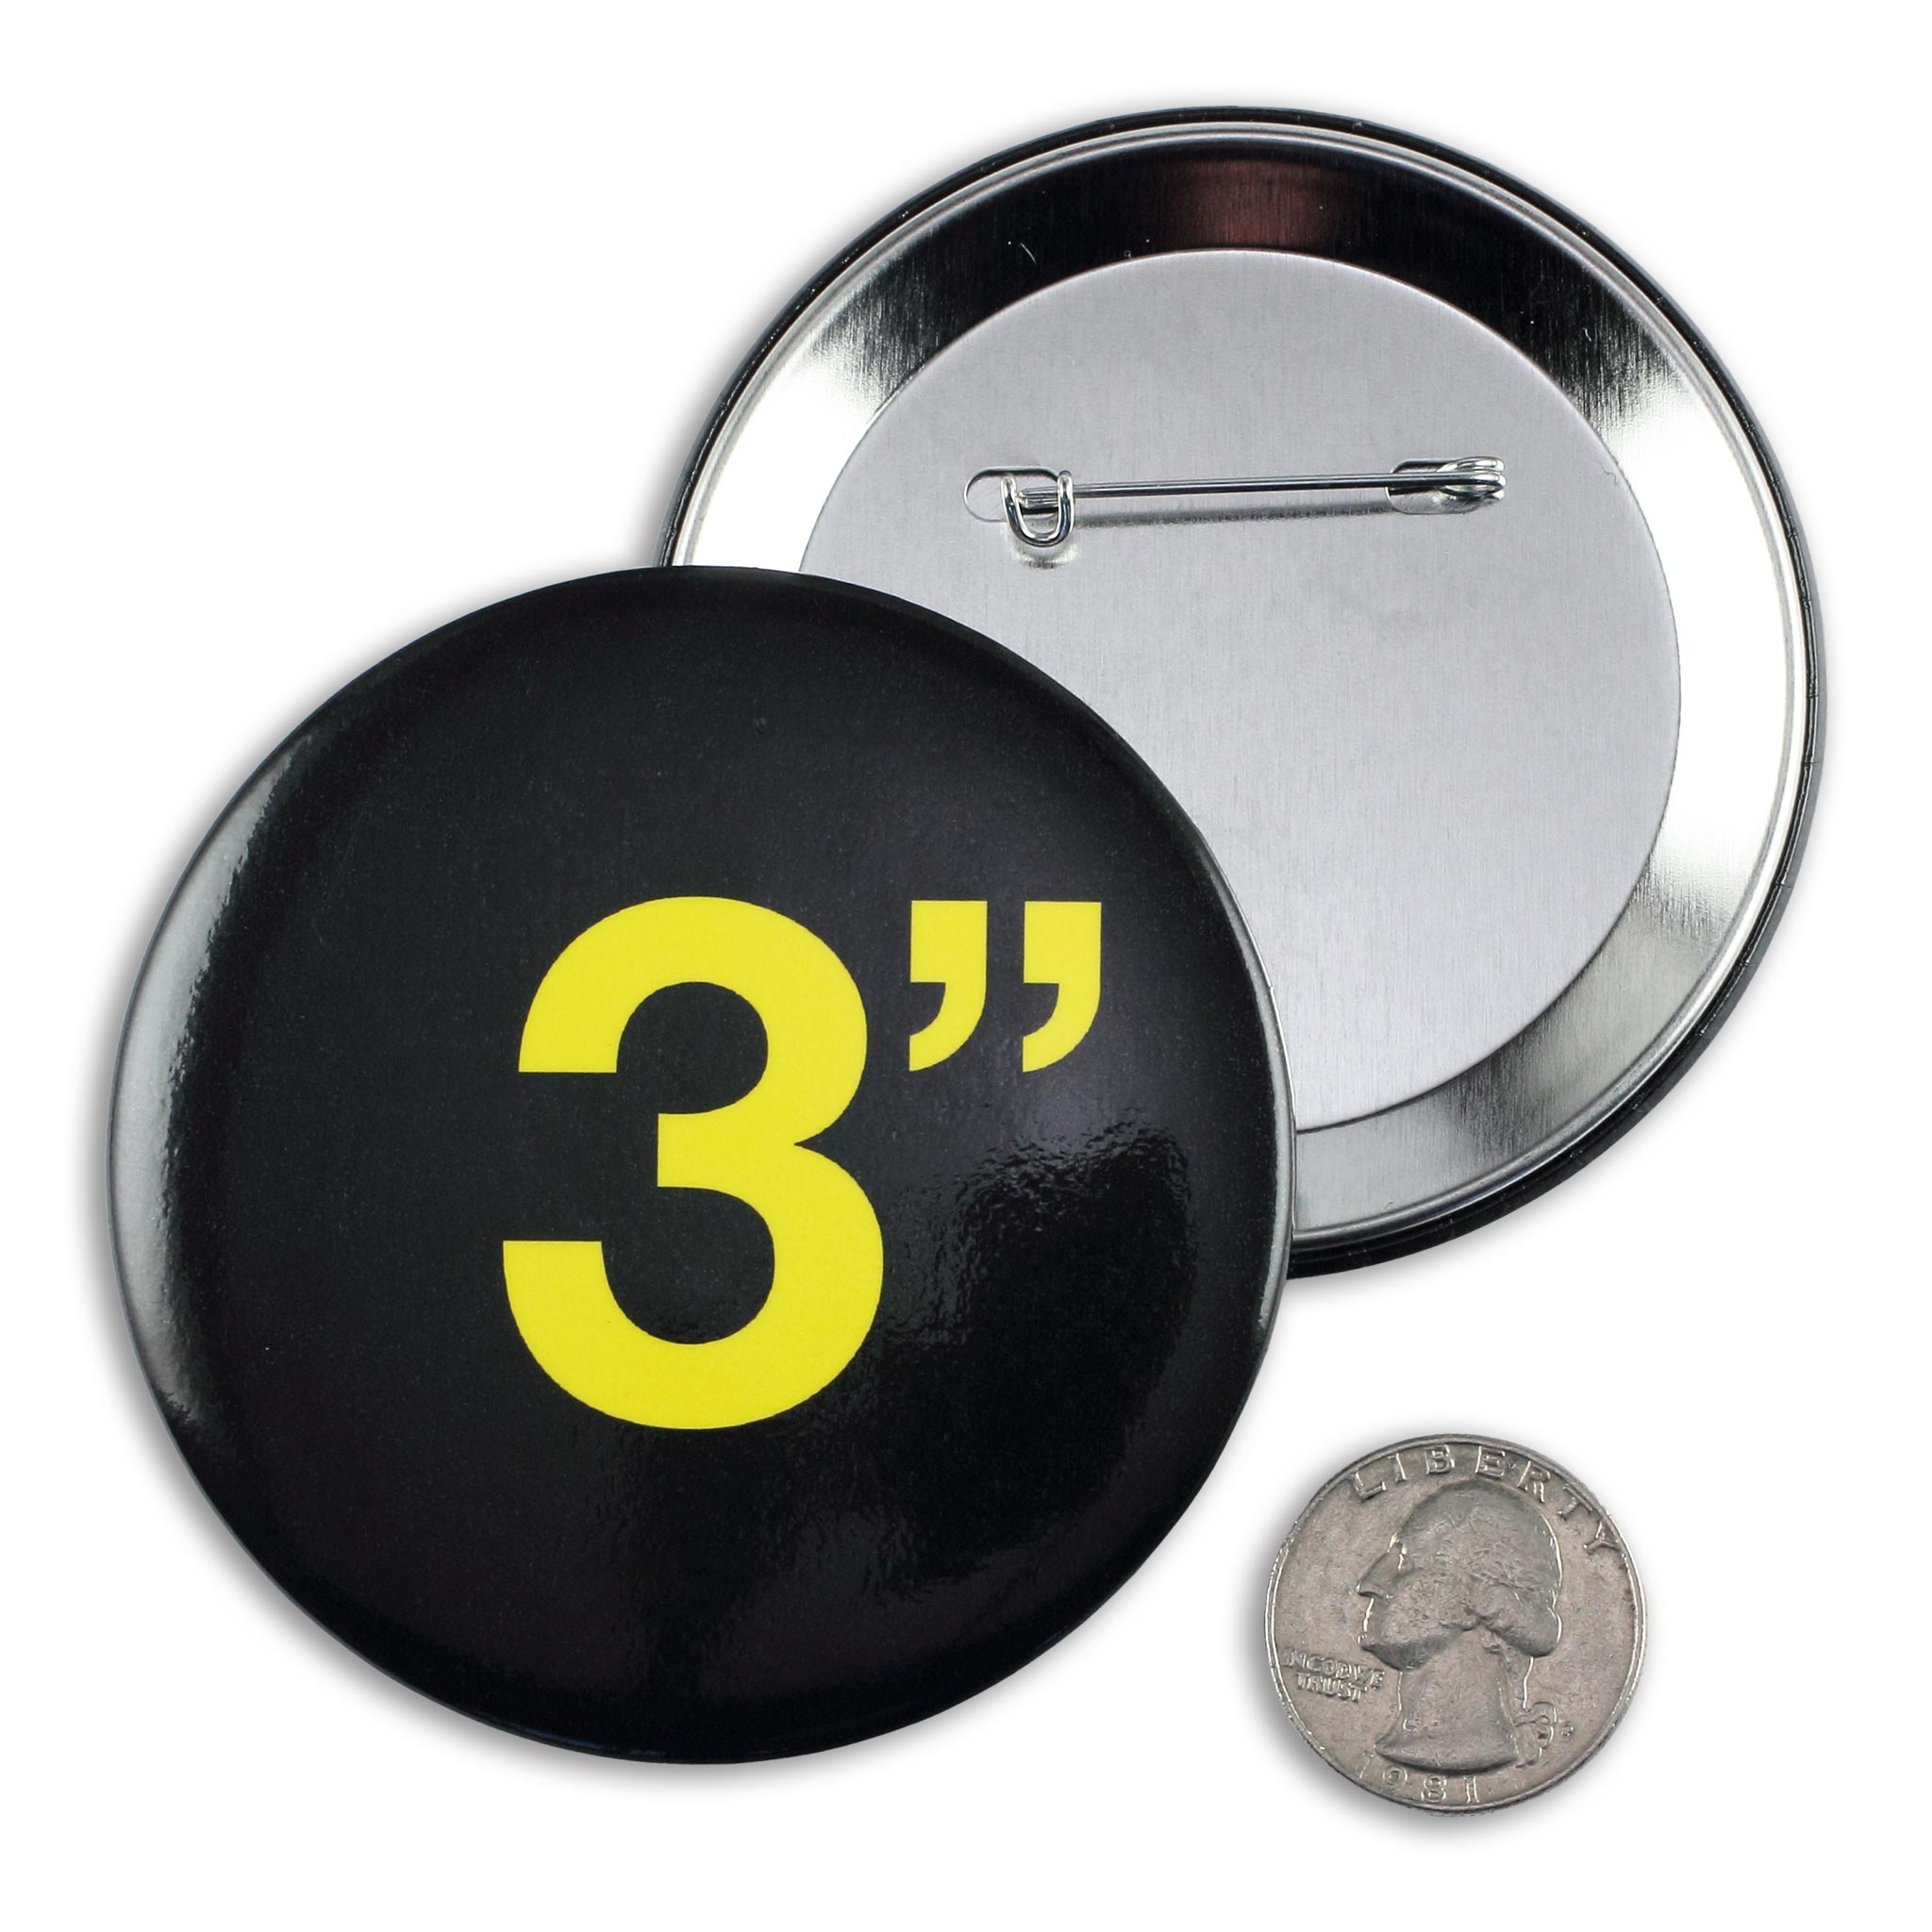 Gray and Yellow Assorted Buttons, 3 Packages